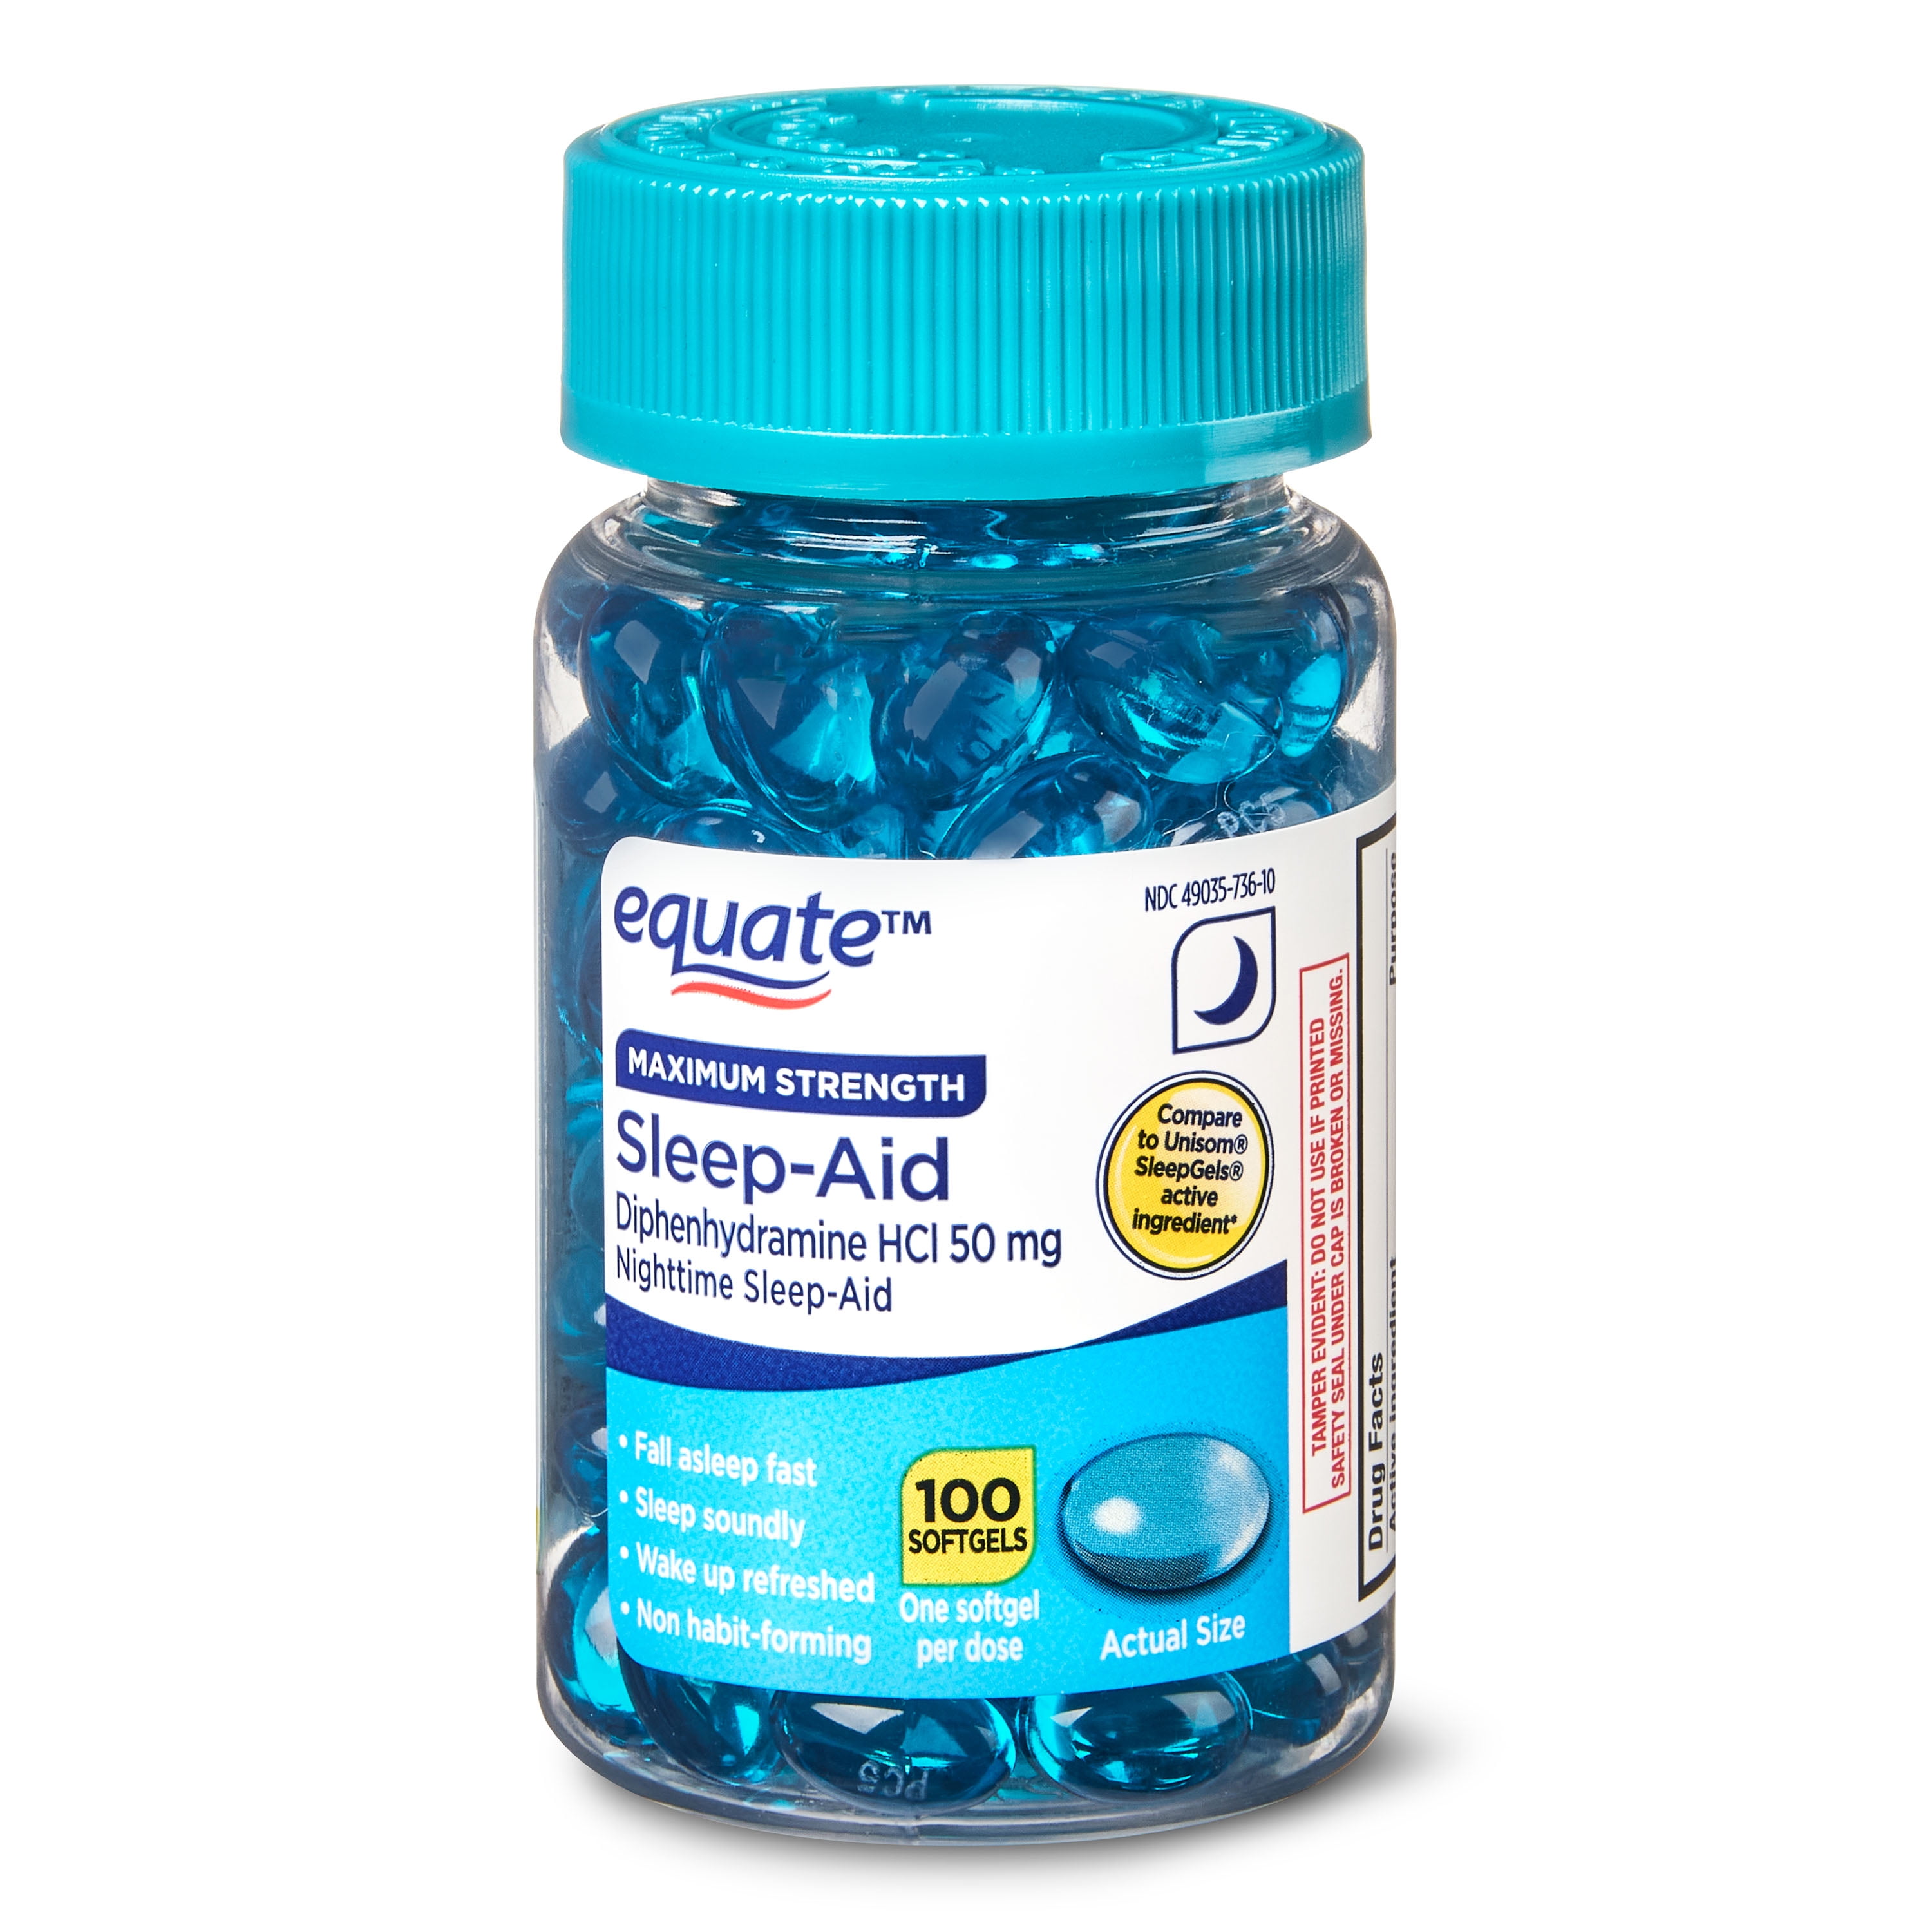 Equate Aide-sommeil 50 mg20 caplets 